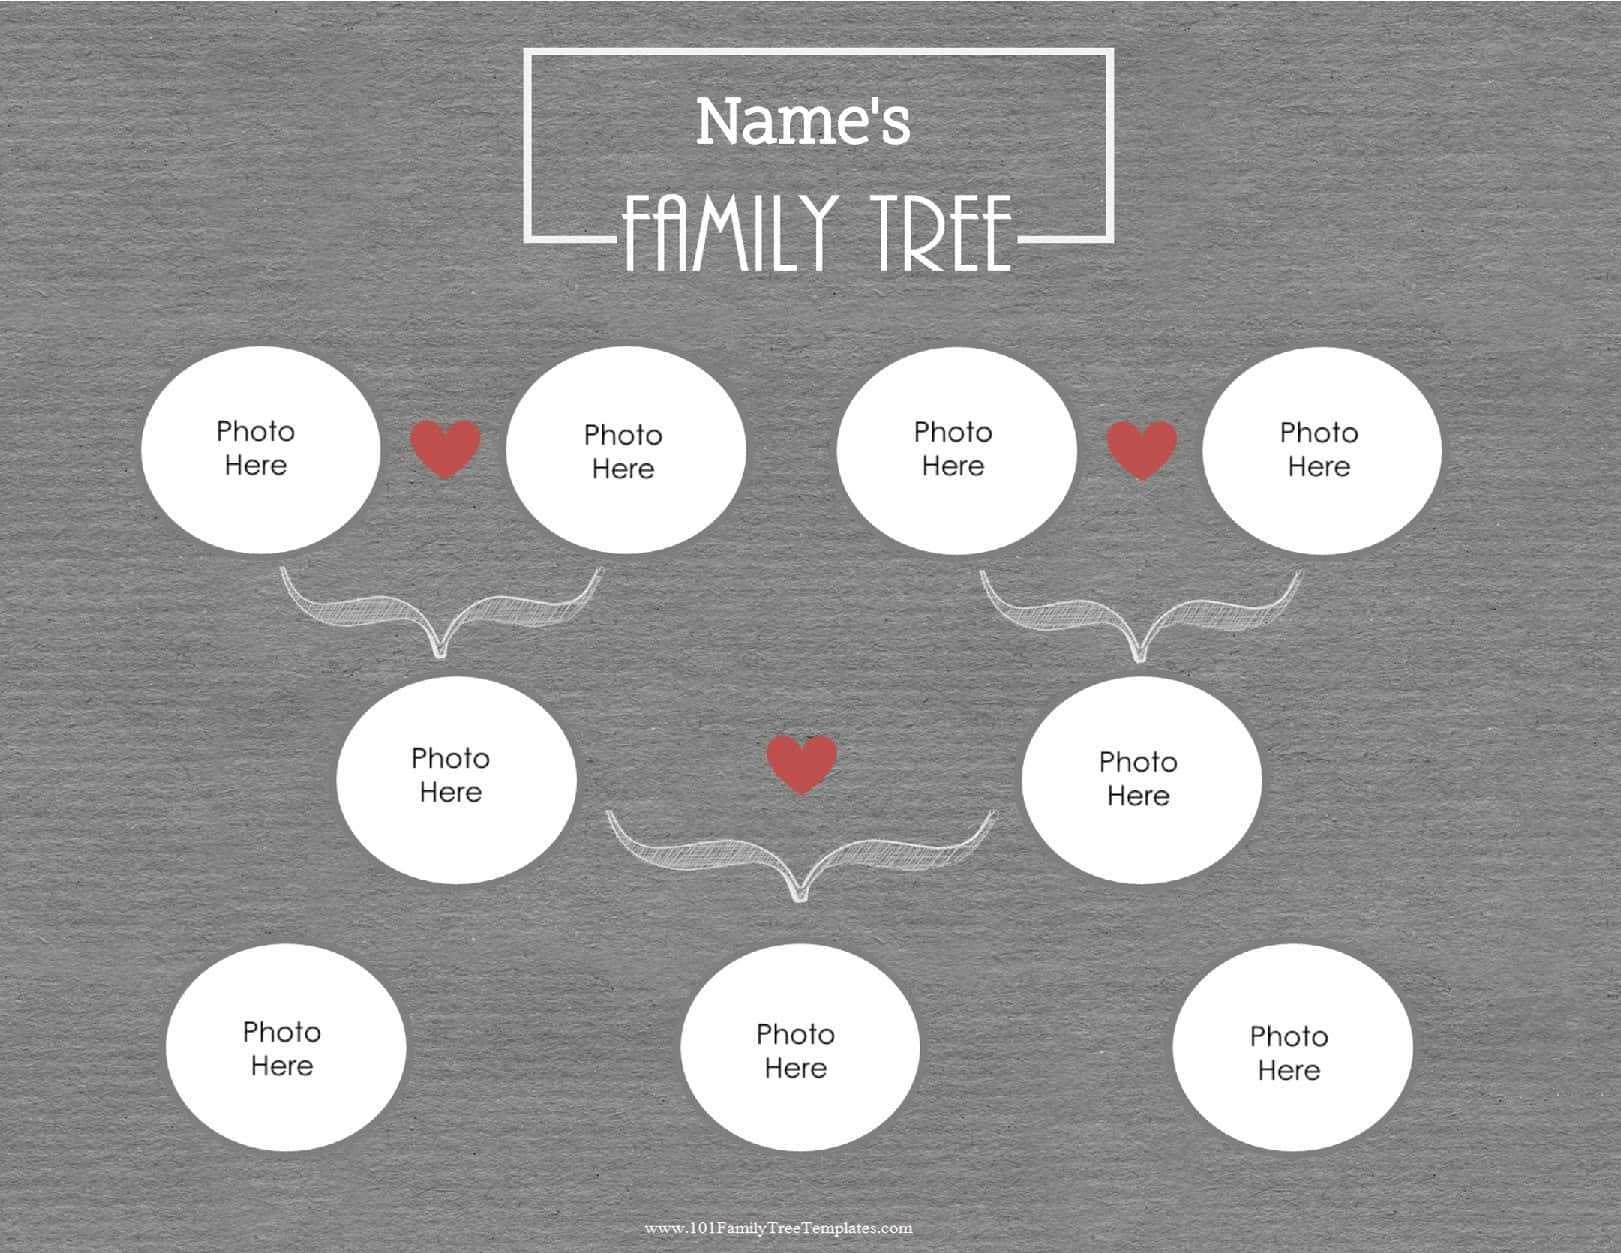 Free Family Tree Creator With 3 Generation Family Tree Template Word